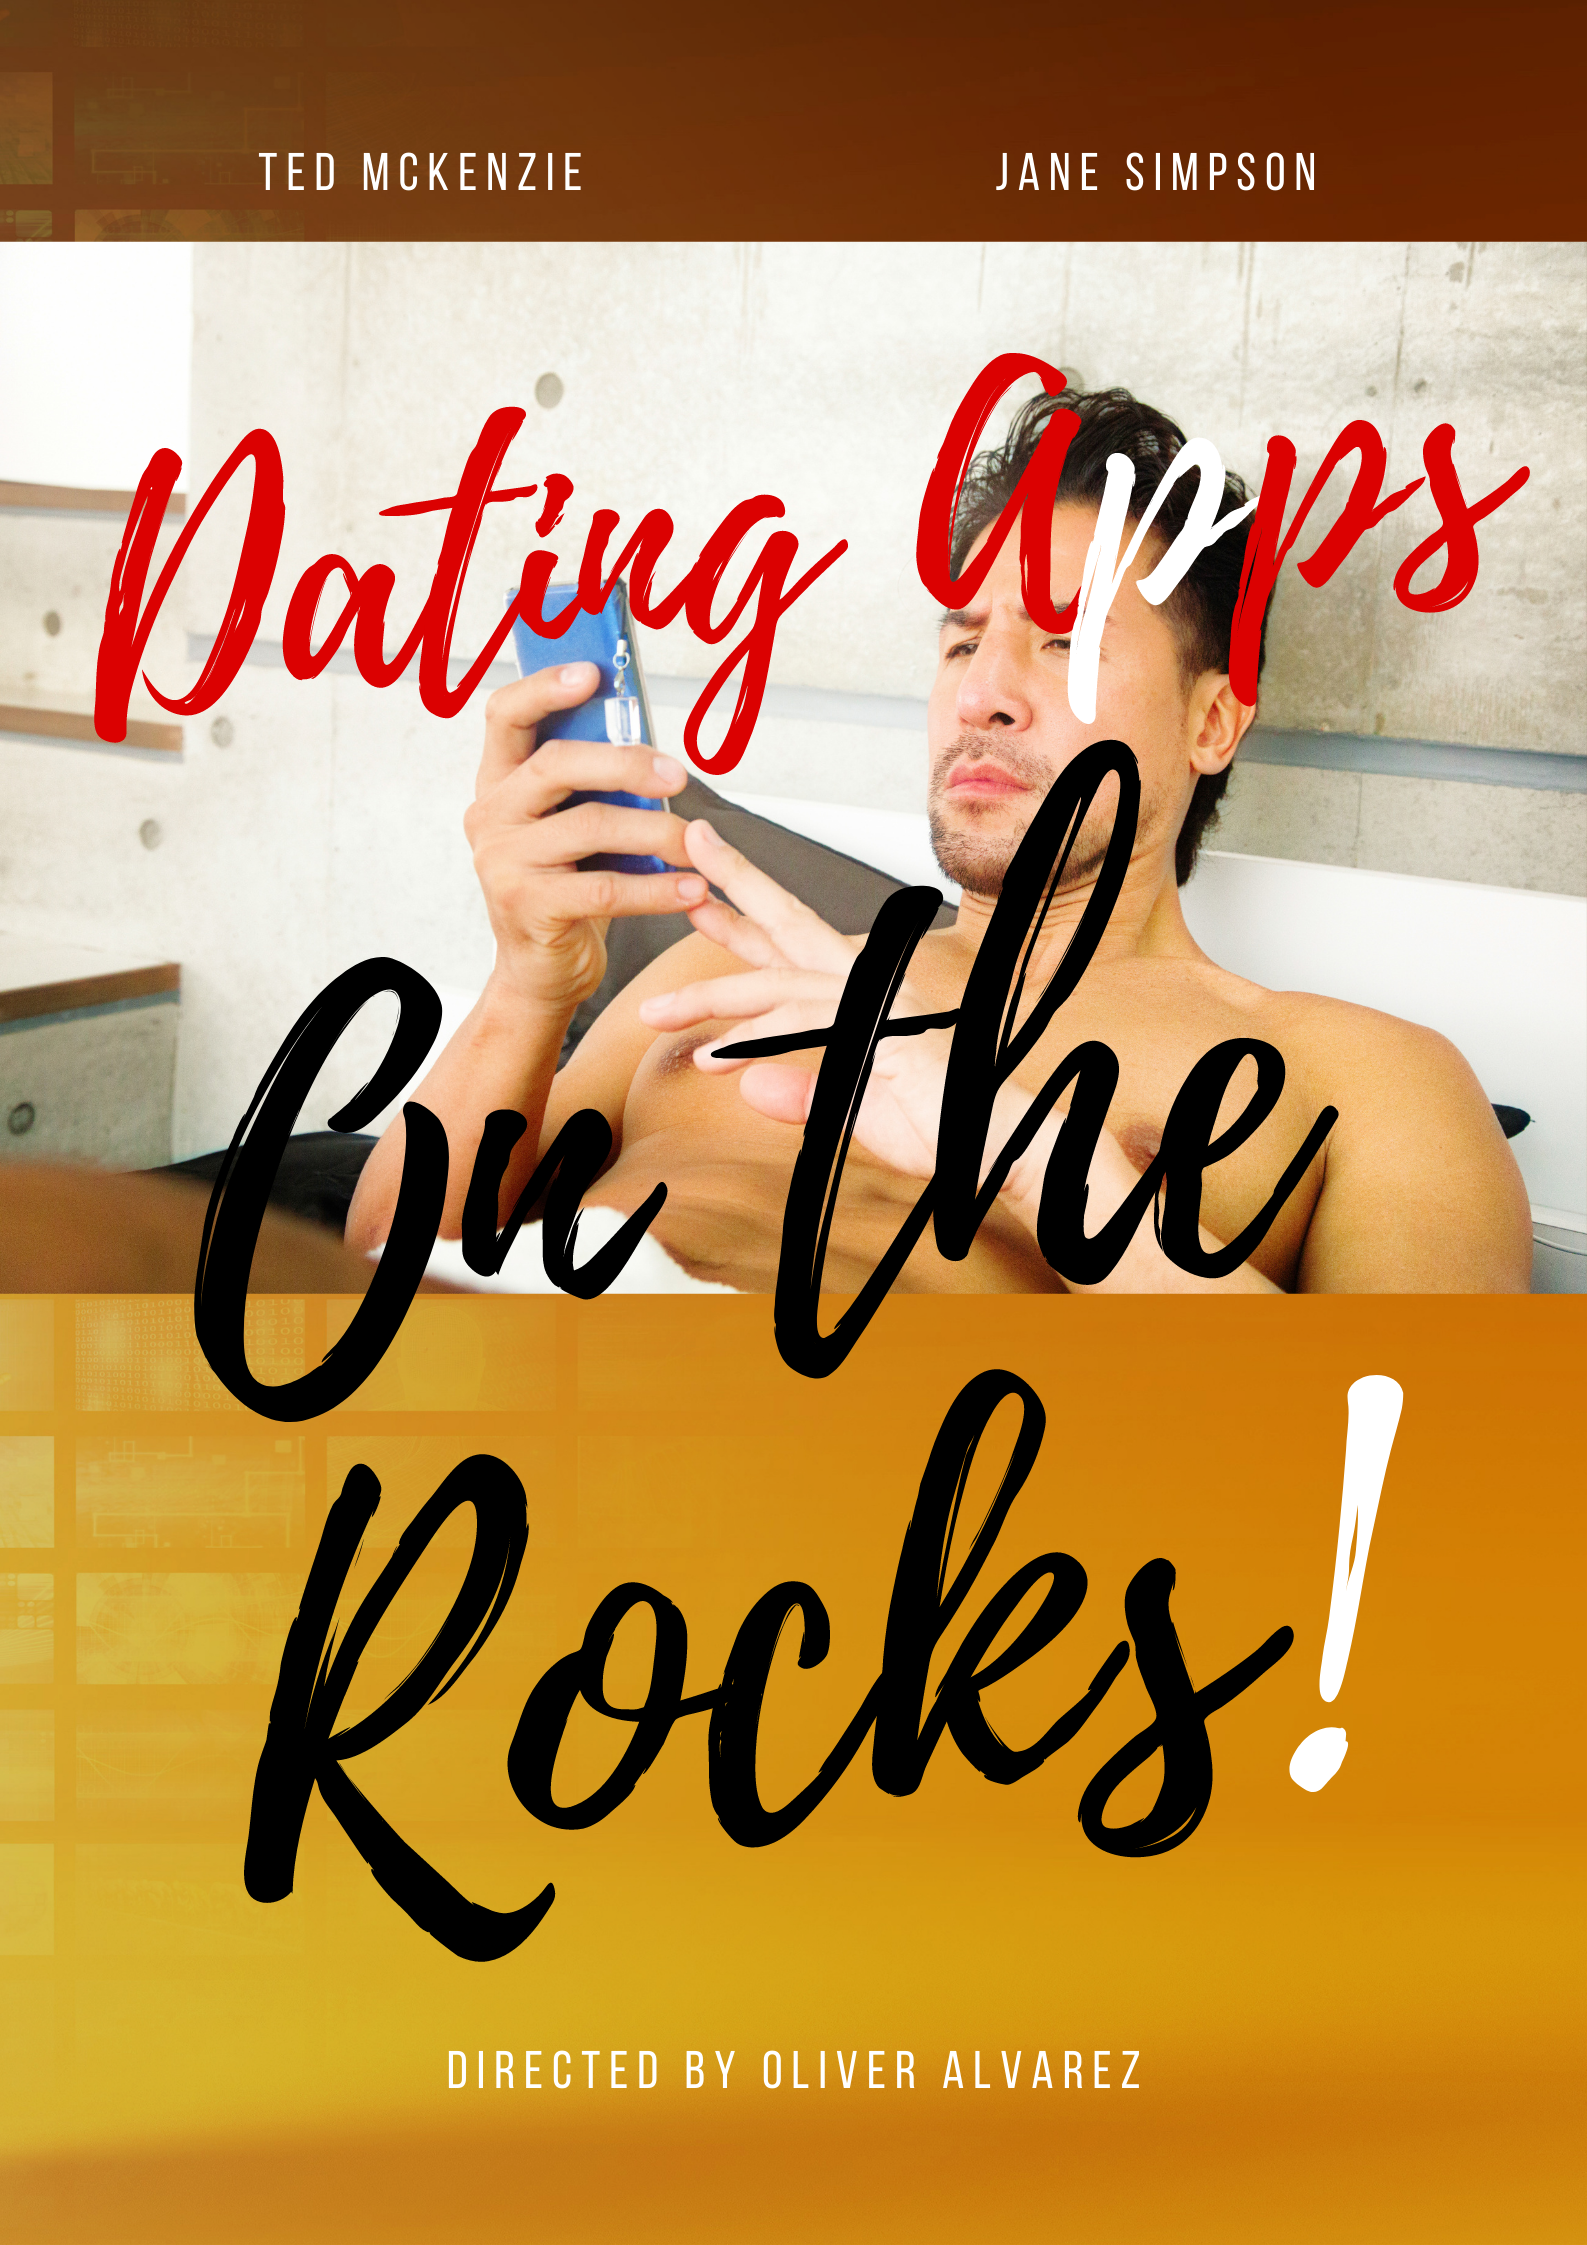 DATING APPS - "ON THE ROCKS!"